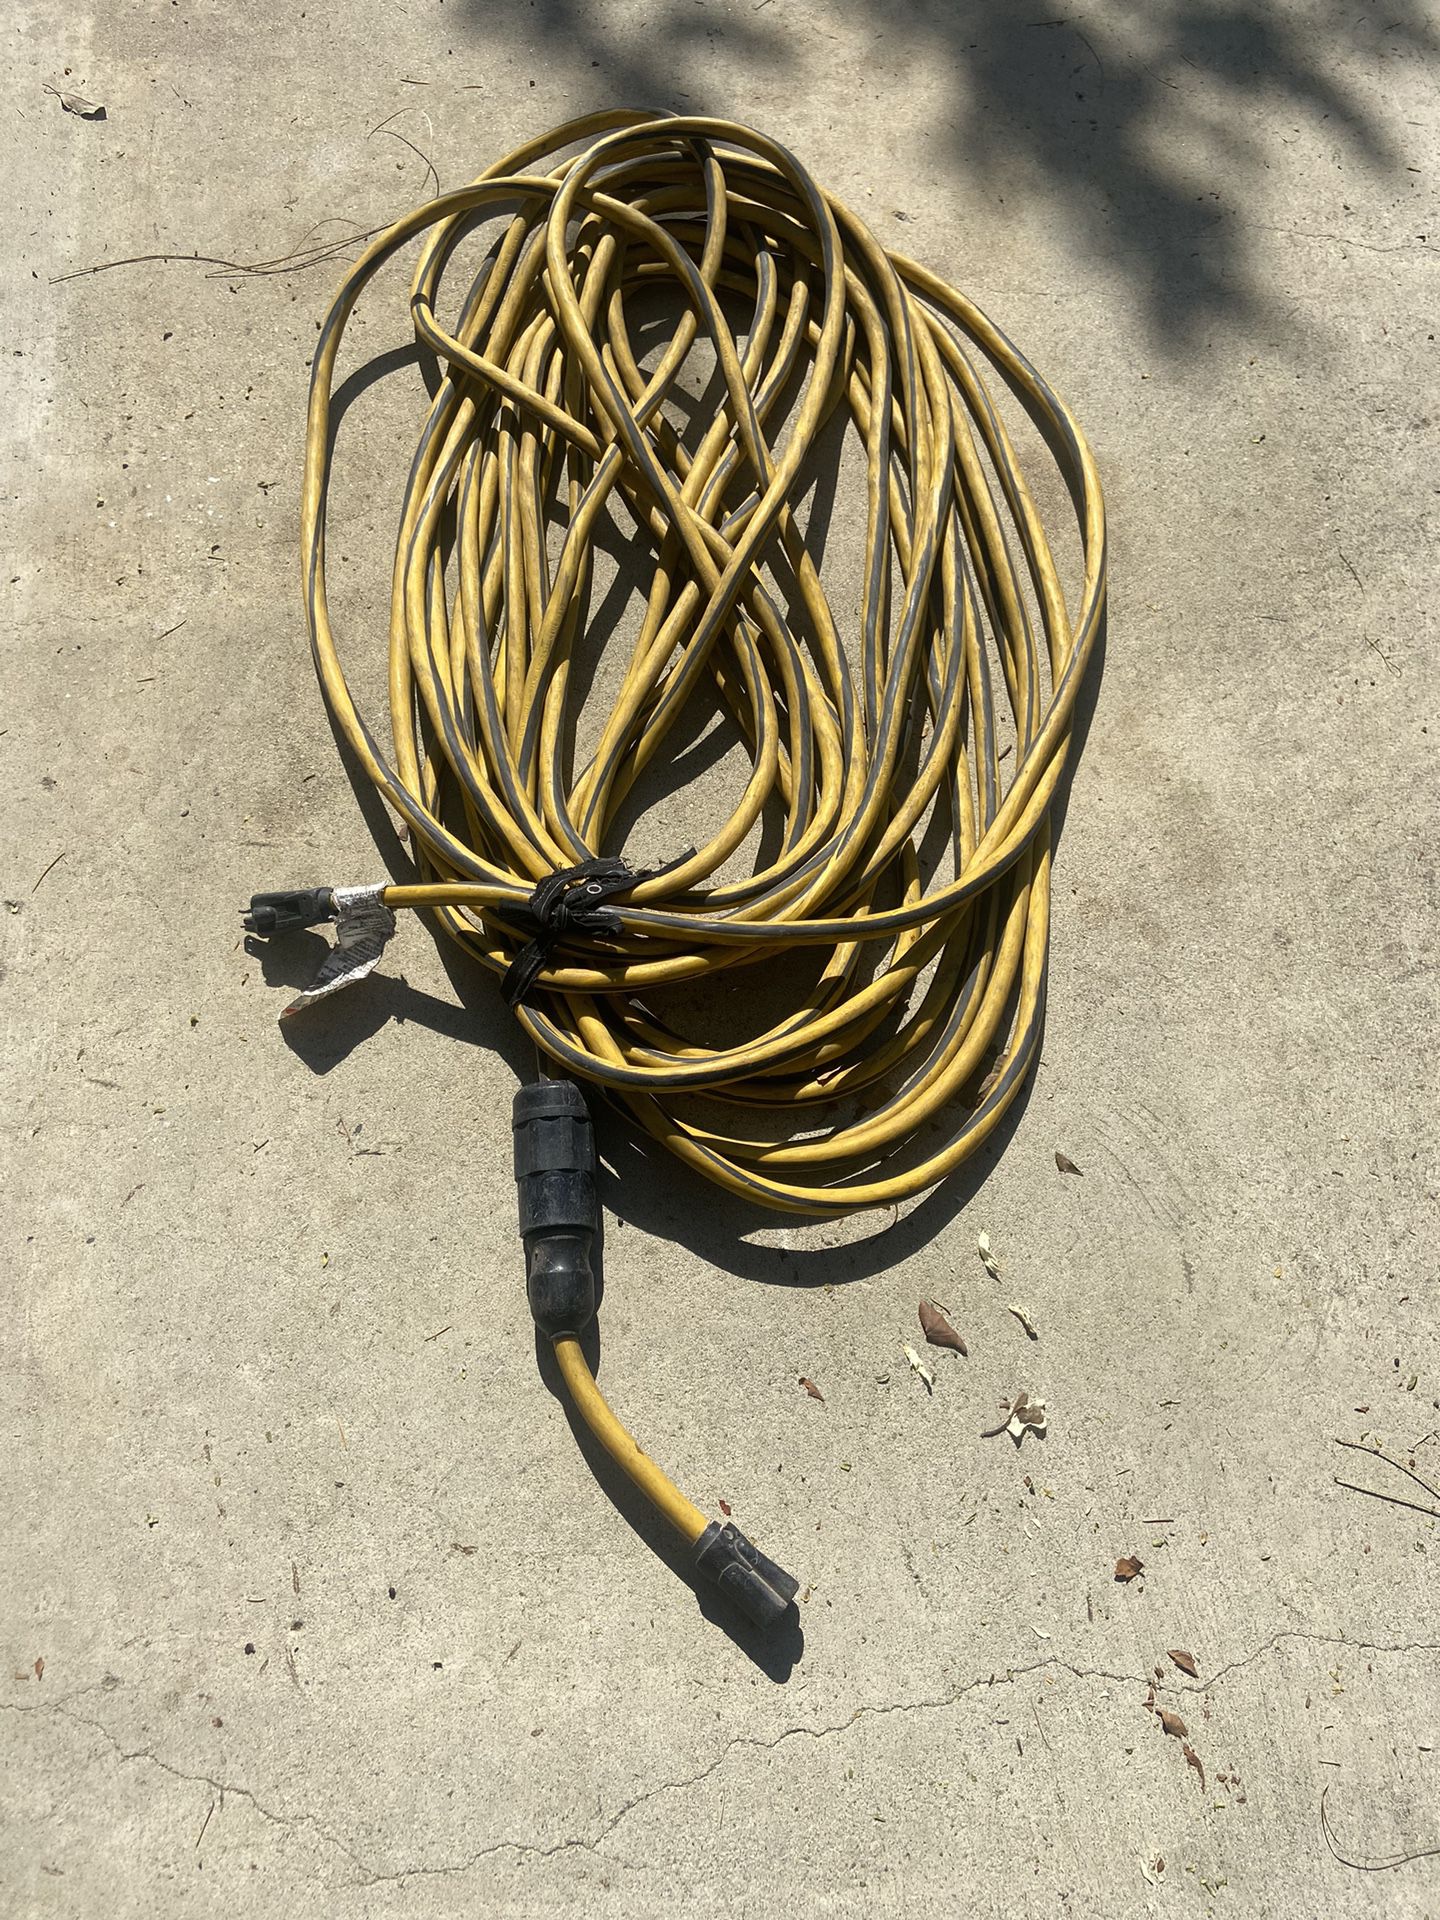 Extension Cord 